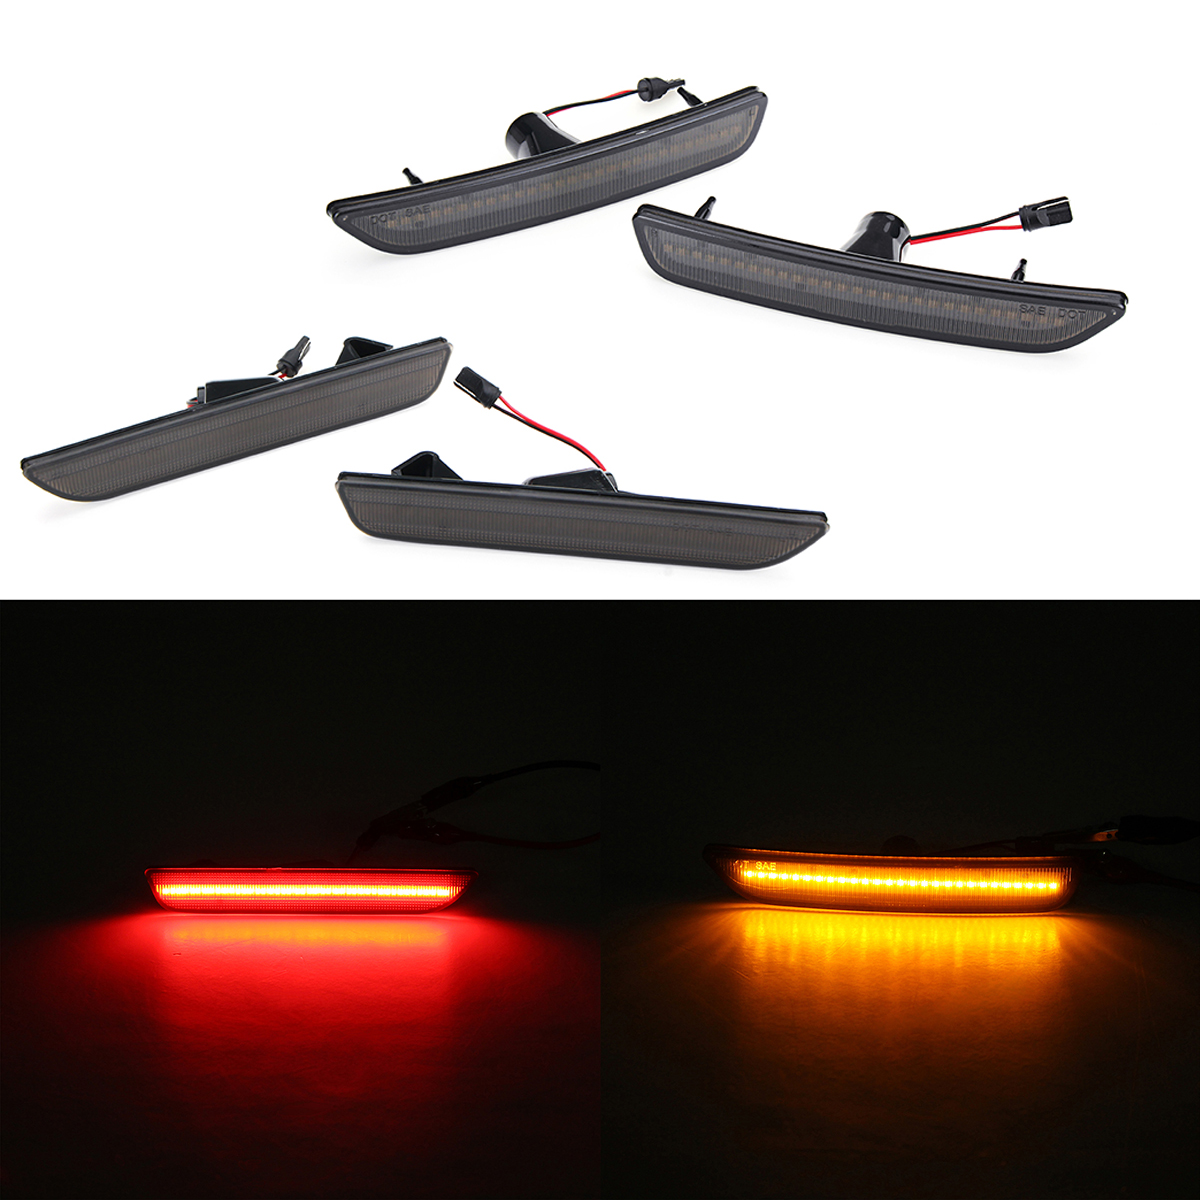 Front/Rear LED Side Marker Lights Turn Signals Lamps Smoked Pair for Ford Mustang 2010-2014